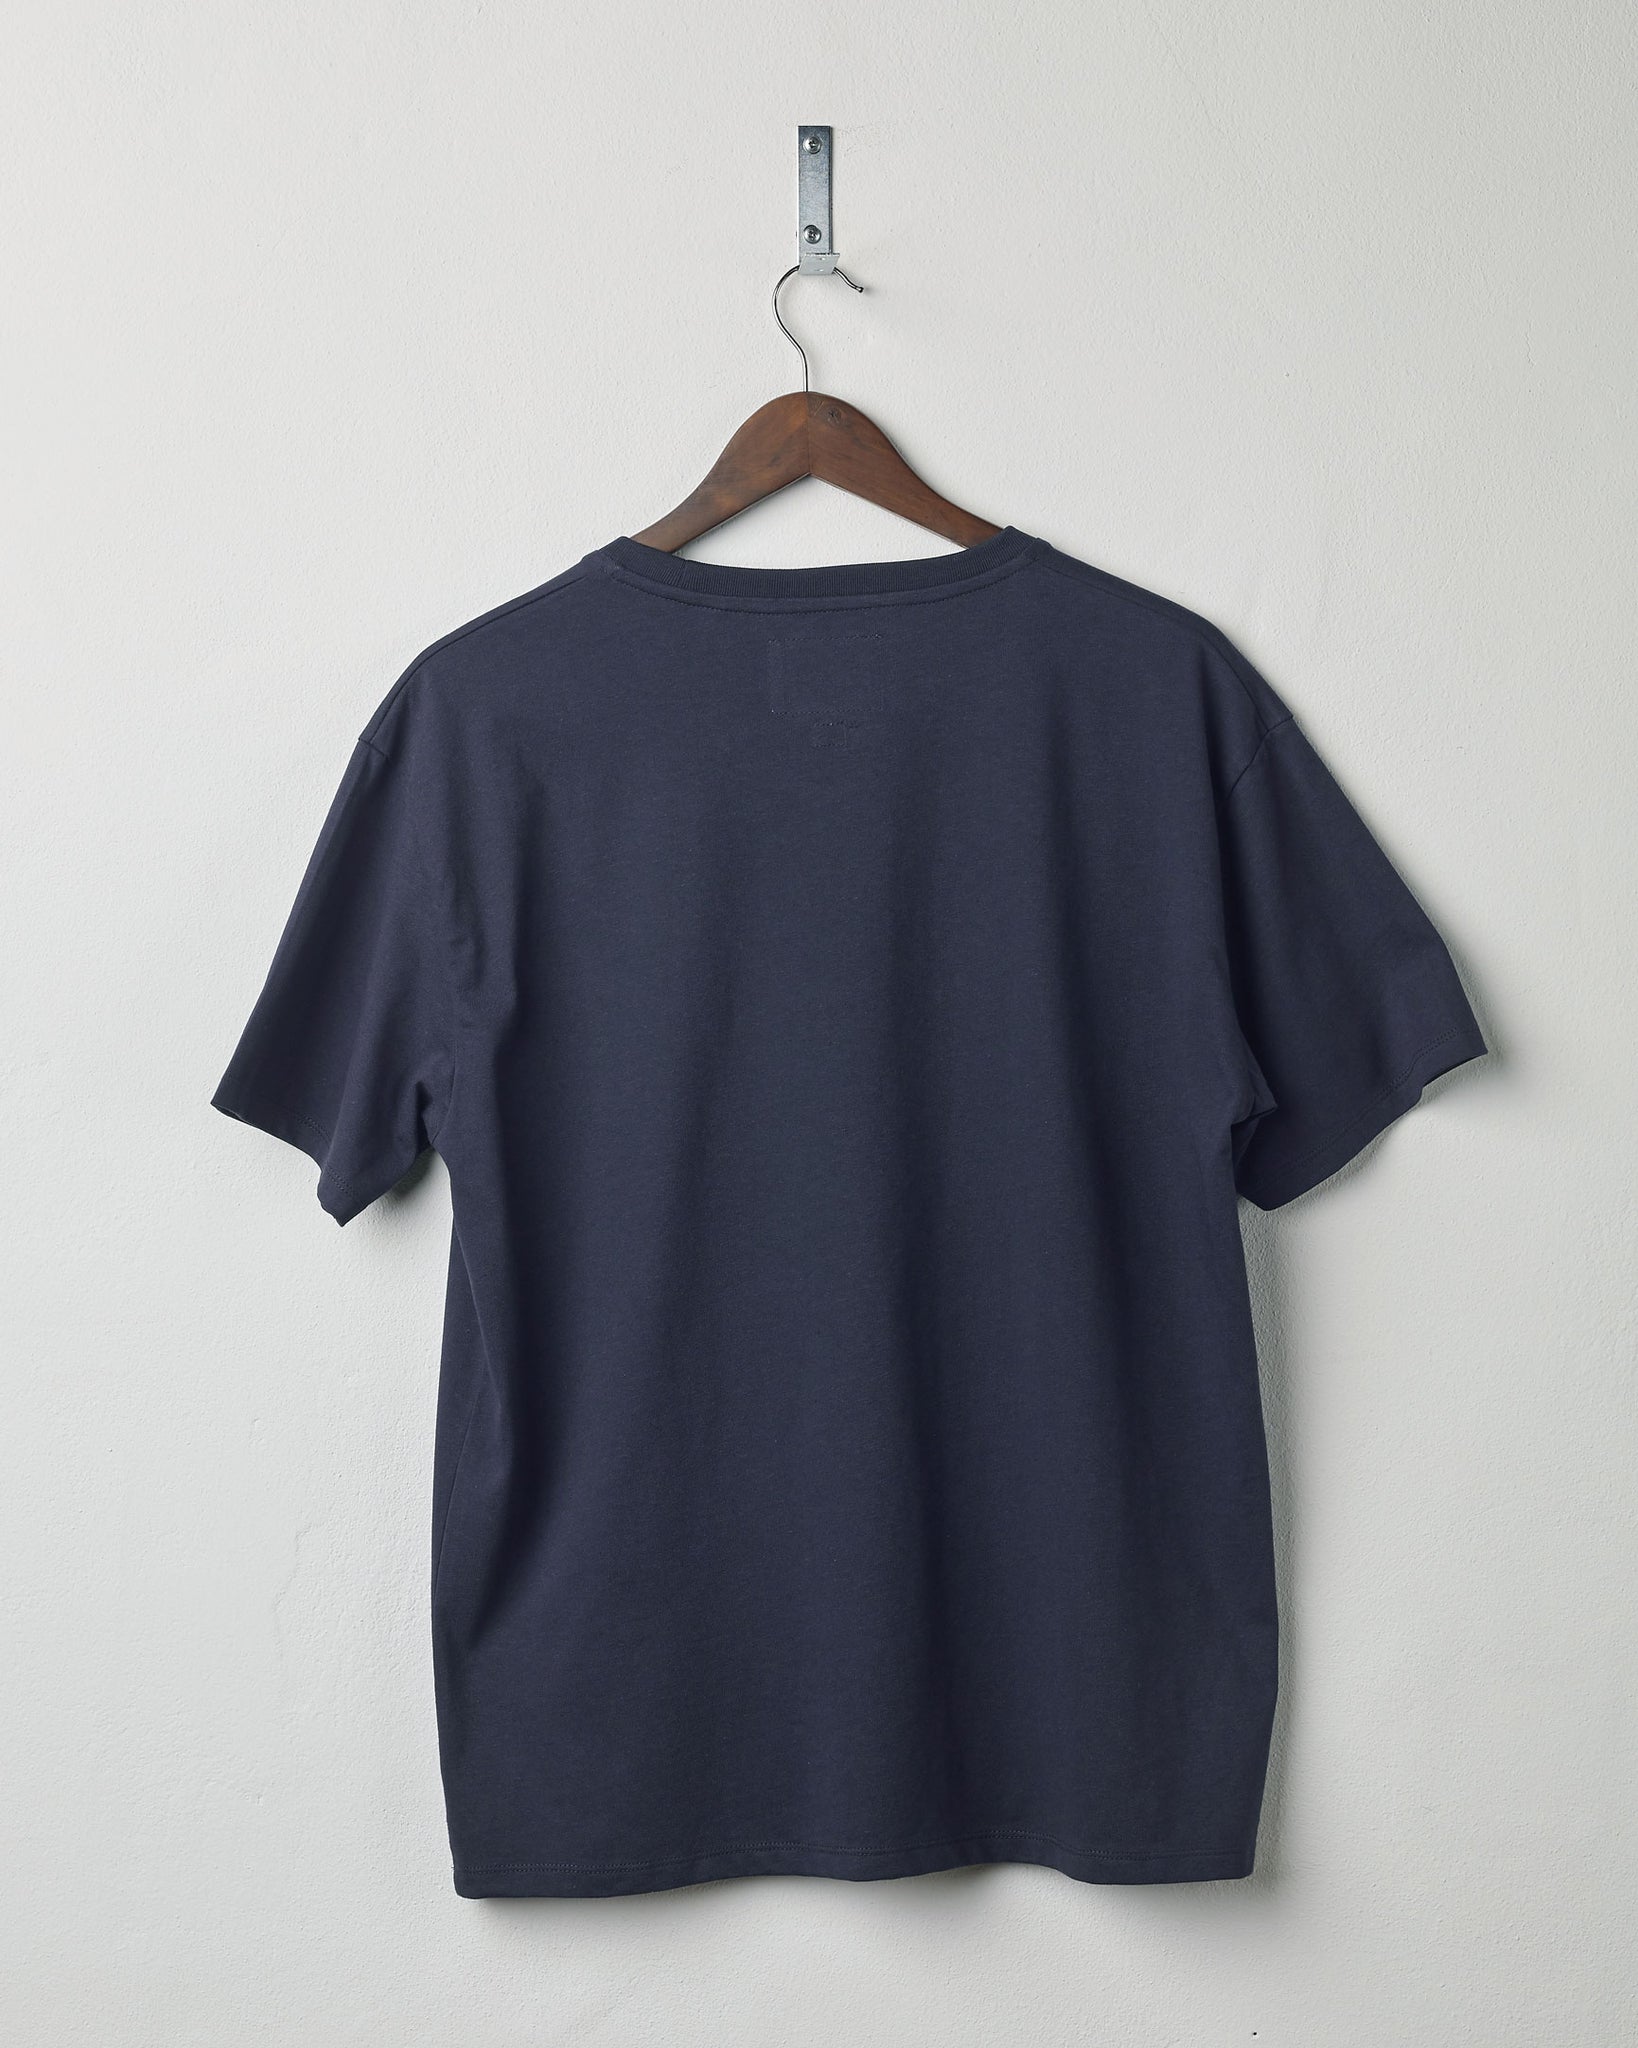 Back view of midnight blue organic cotton #7006 jersey T-shirt by Uskees. Presented on hanger against white background.